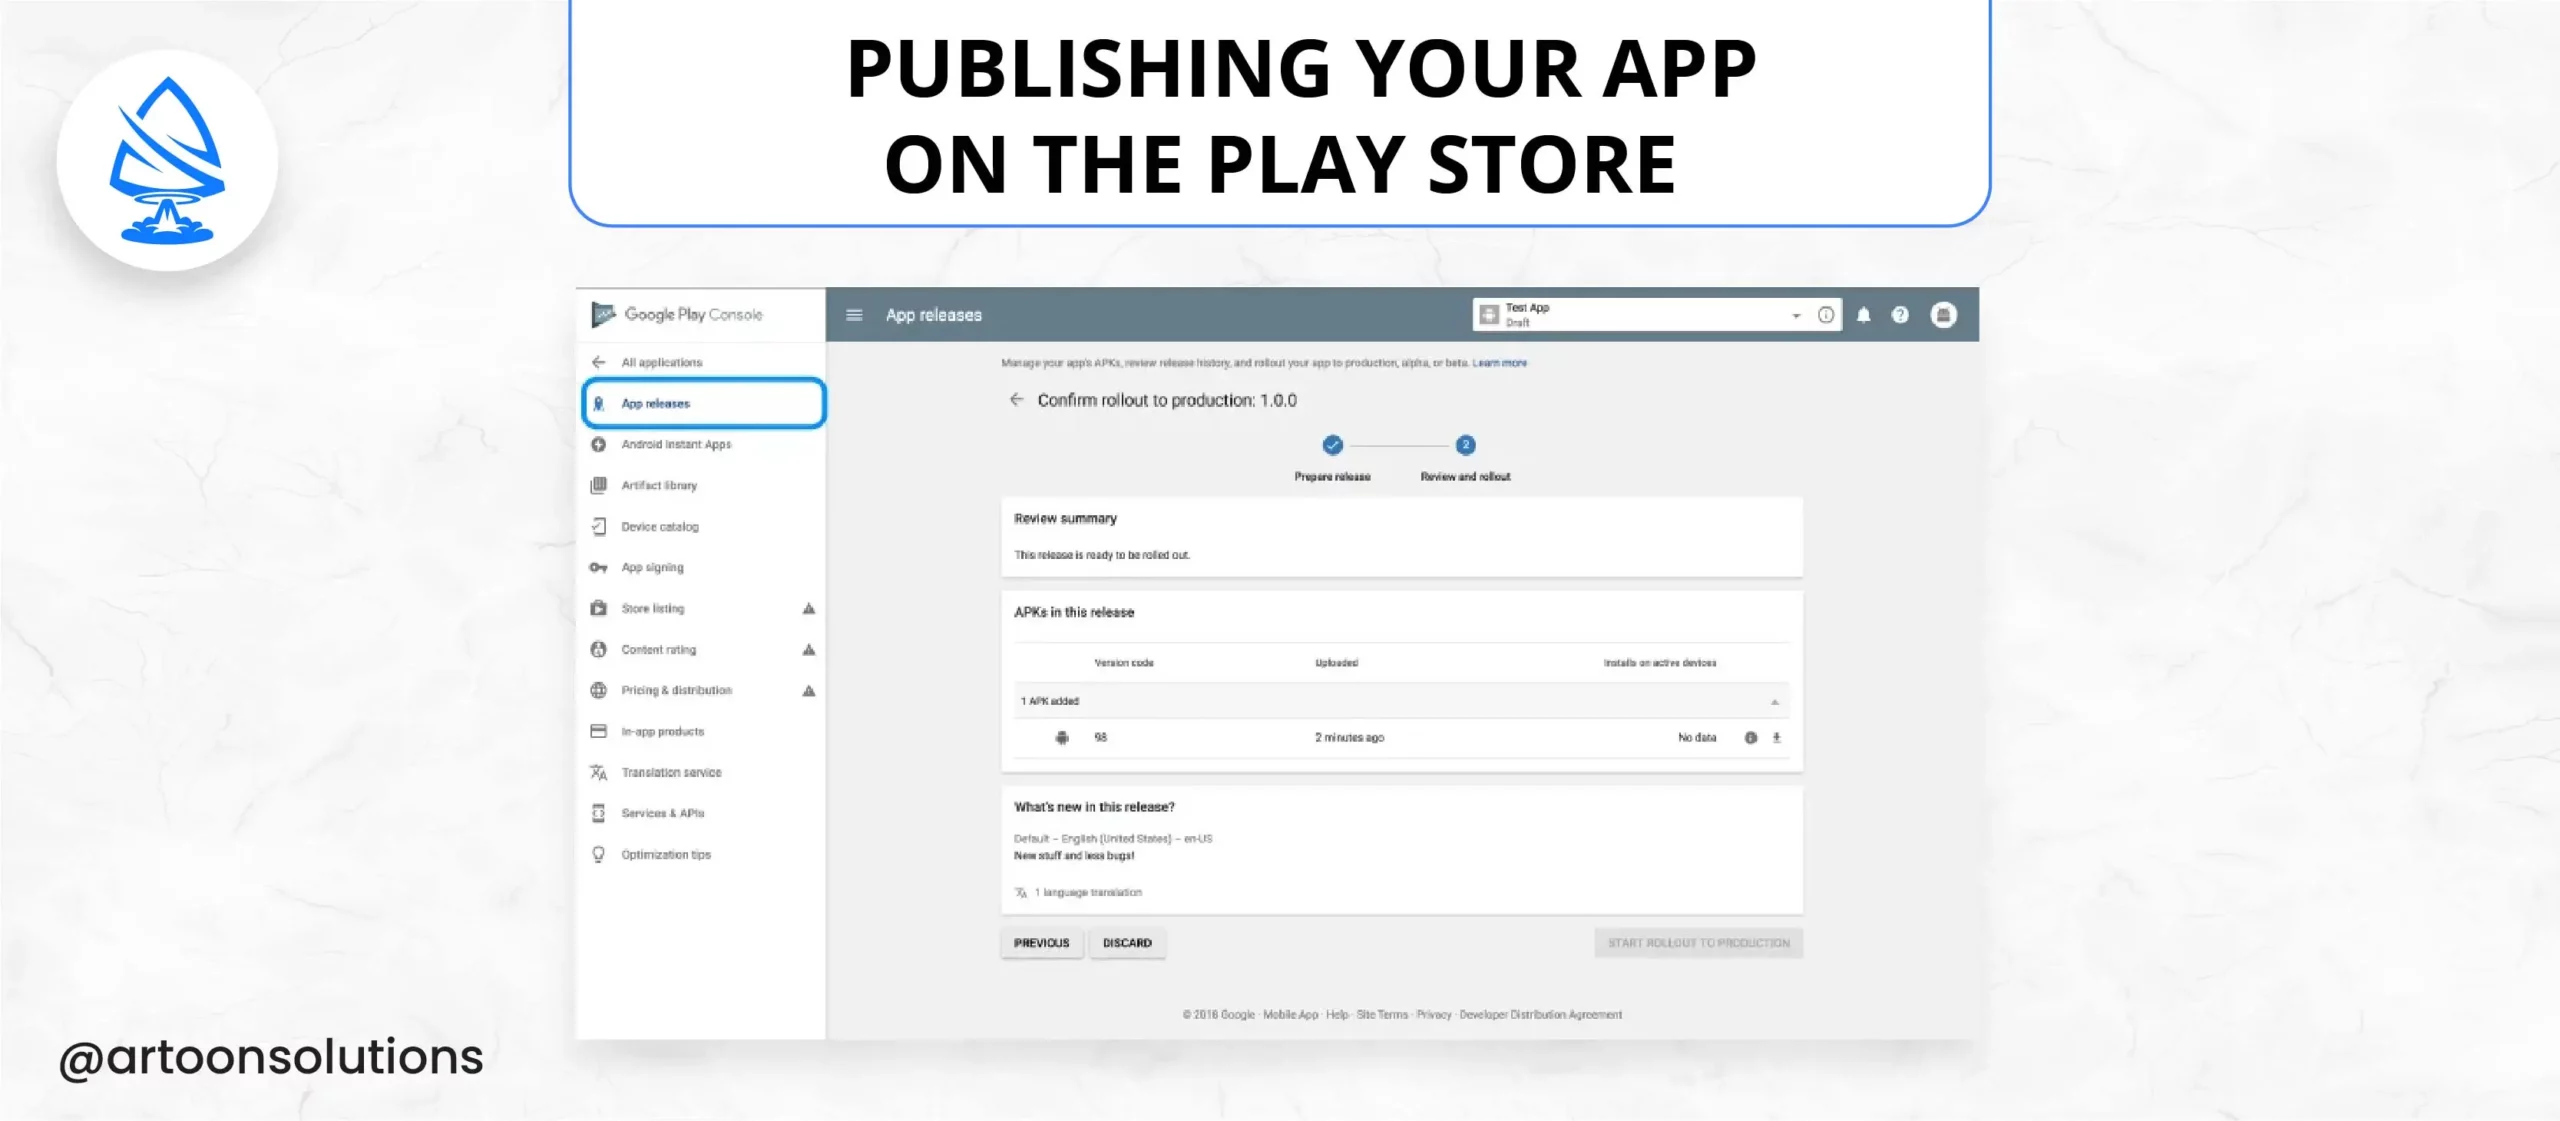 Publishing your app on the play store